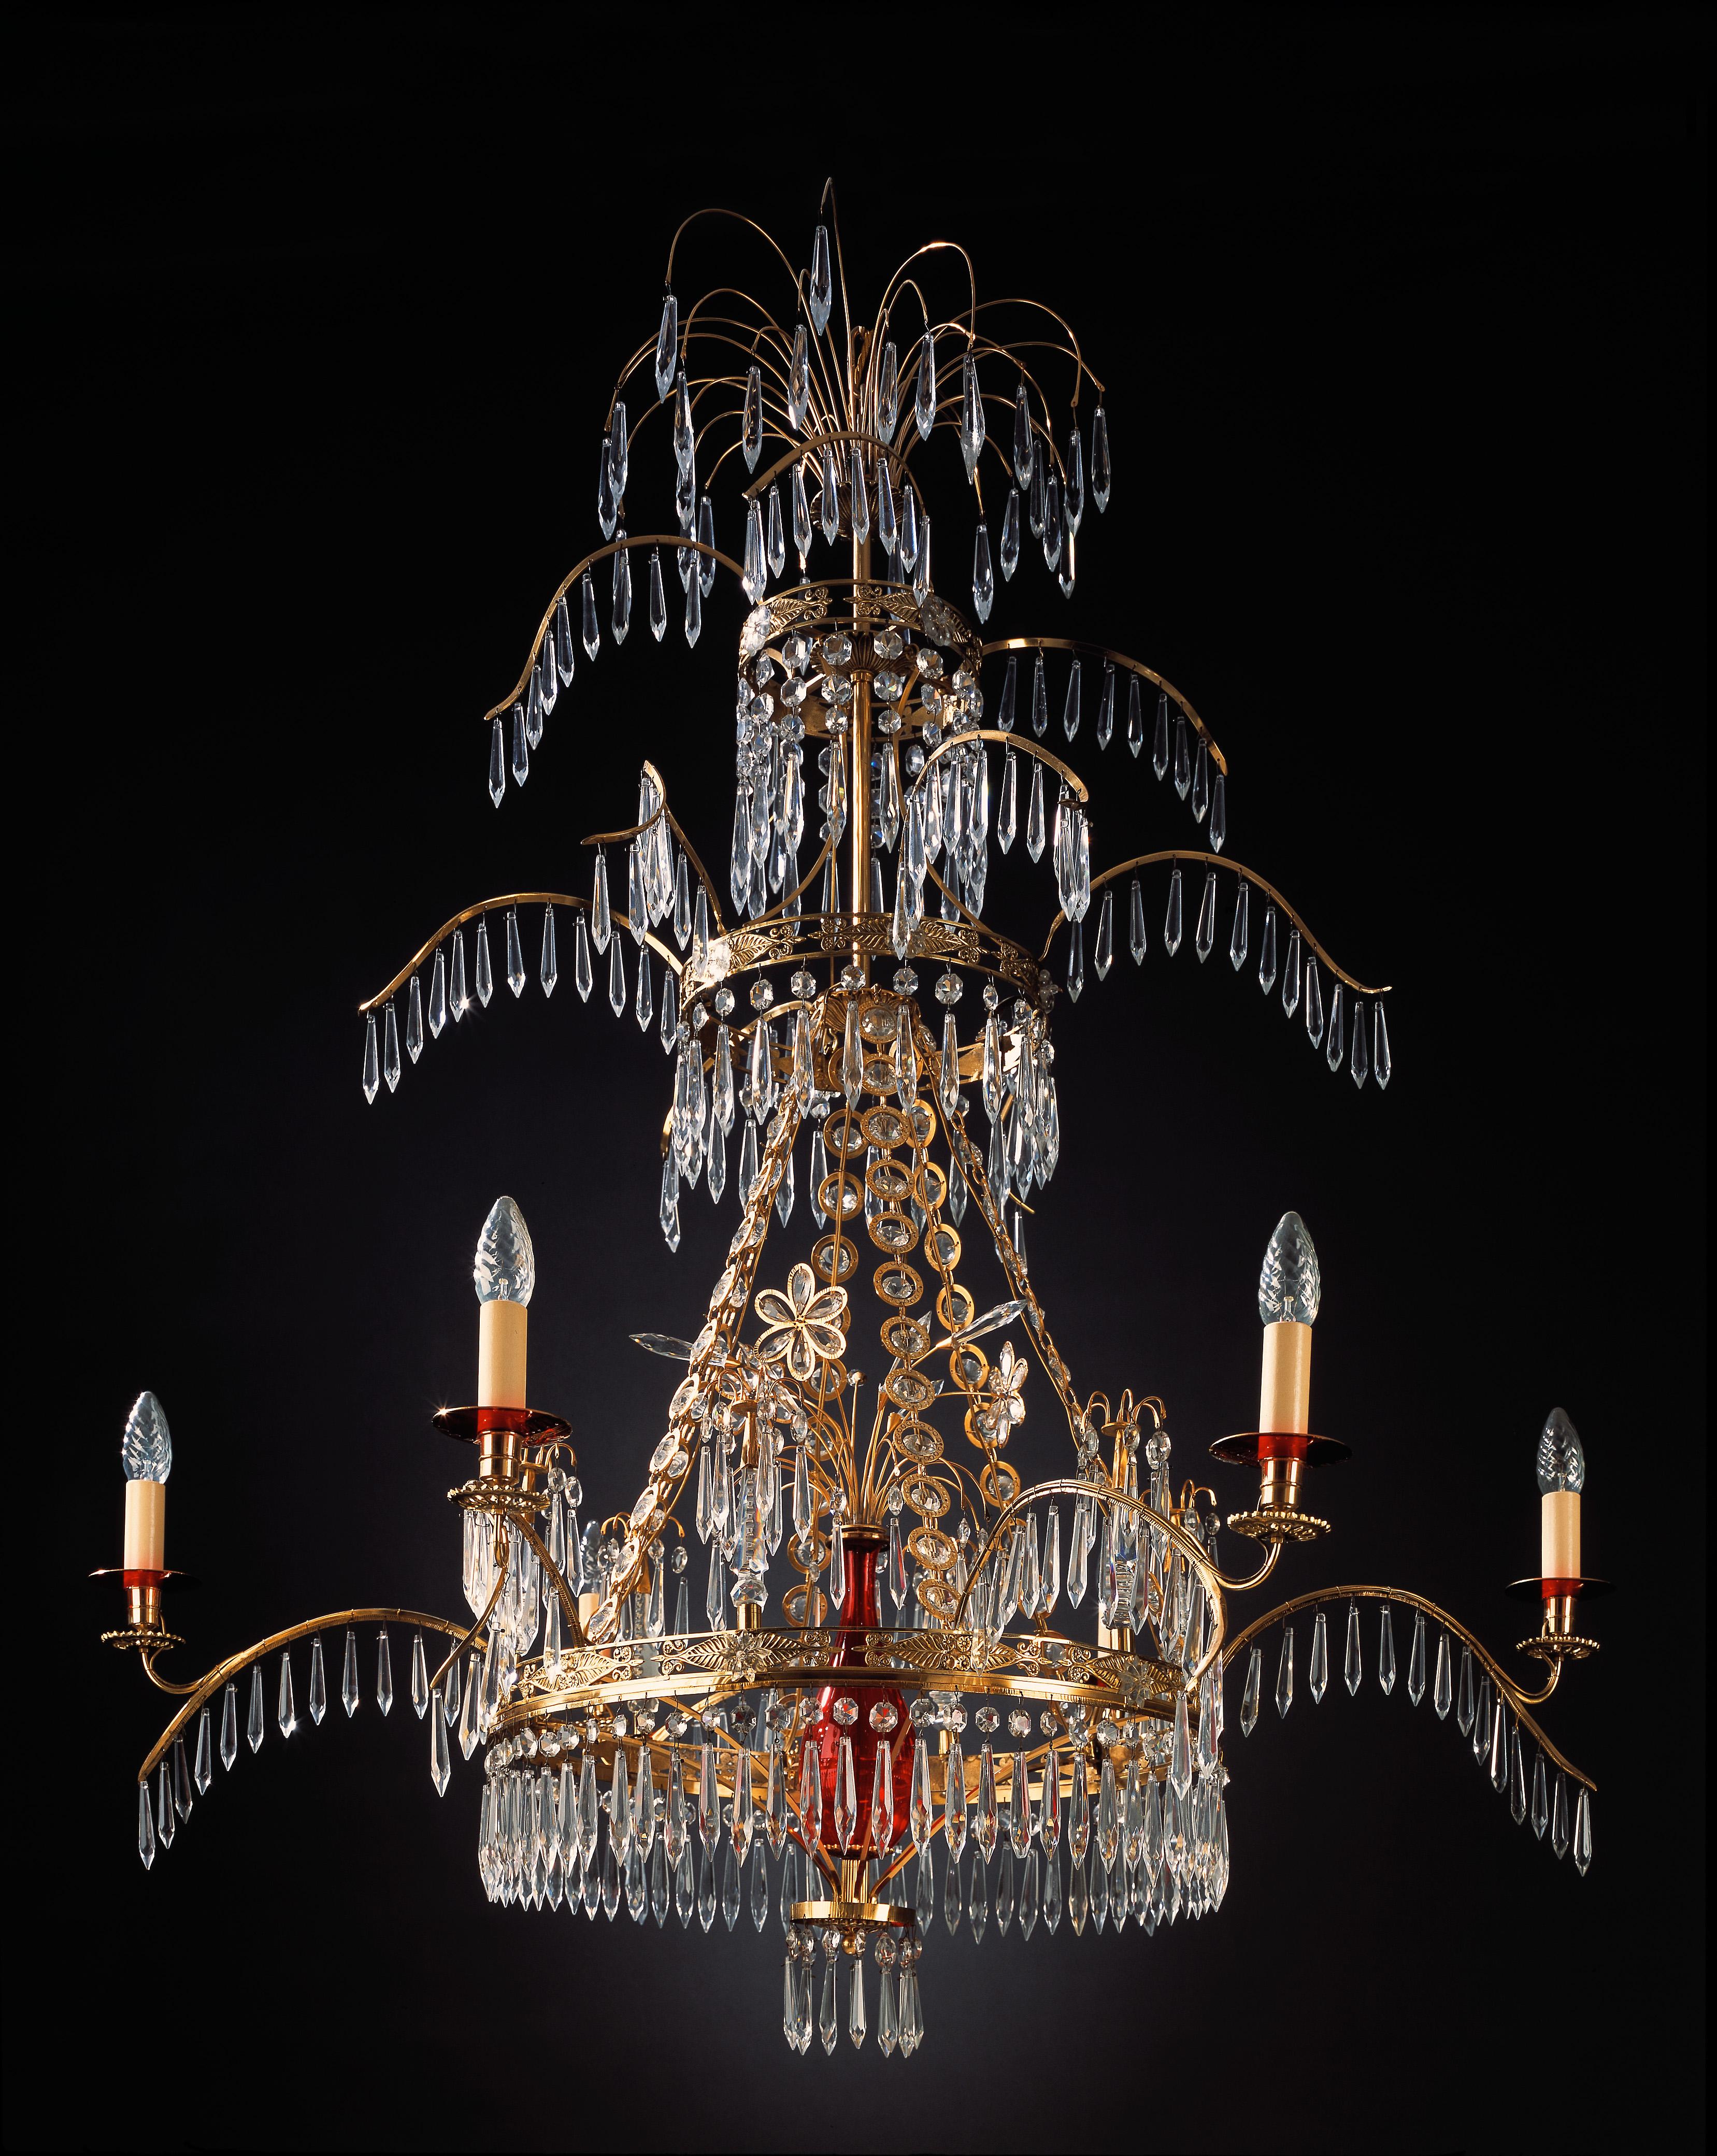 An impressive and elegant pair of Russian style neoclassical chandeliers. The circular pierced corona hung with facetted drops and suspending from chains, the main circlet issuing six branches and a central baluster-shaped red glass stem with